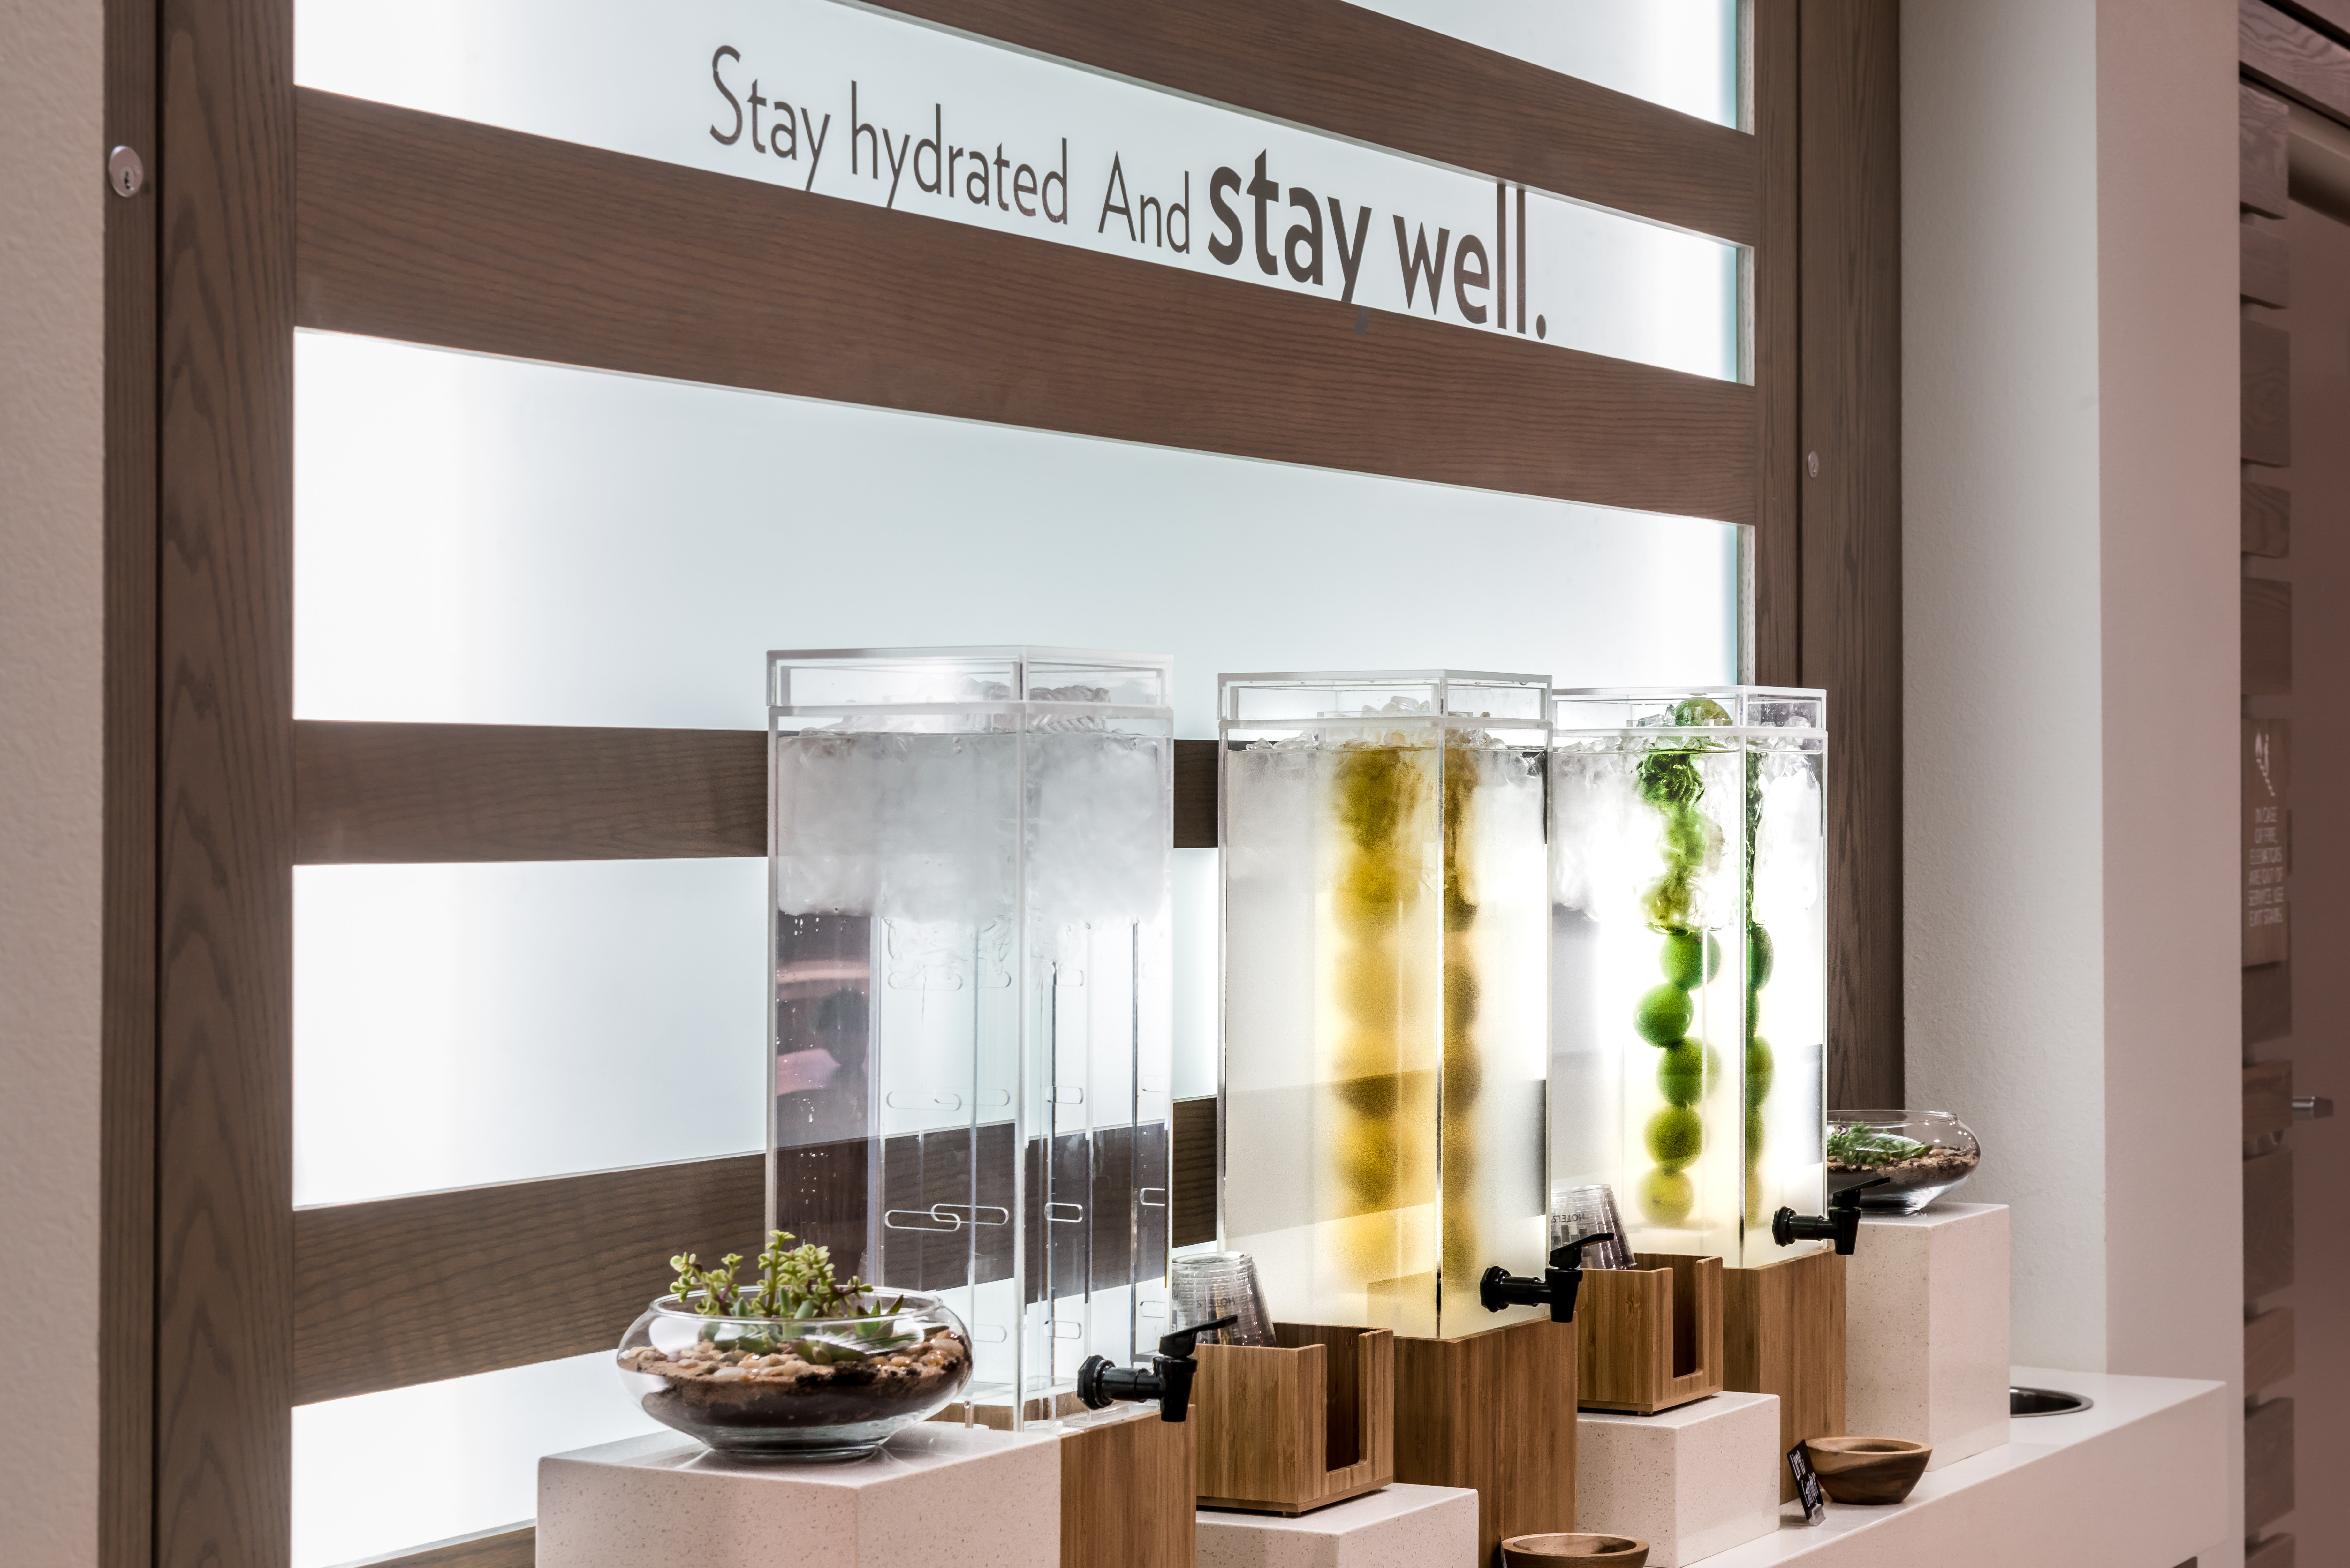 Quench your thirst with our healthy infused water in the lobby.